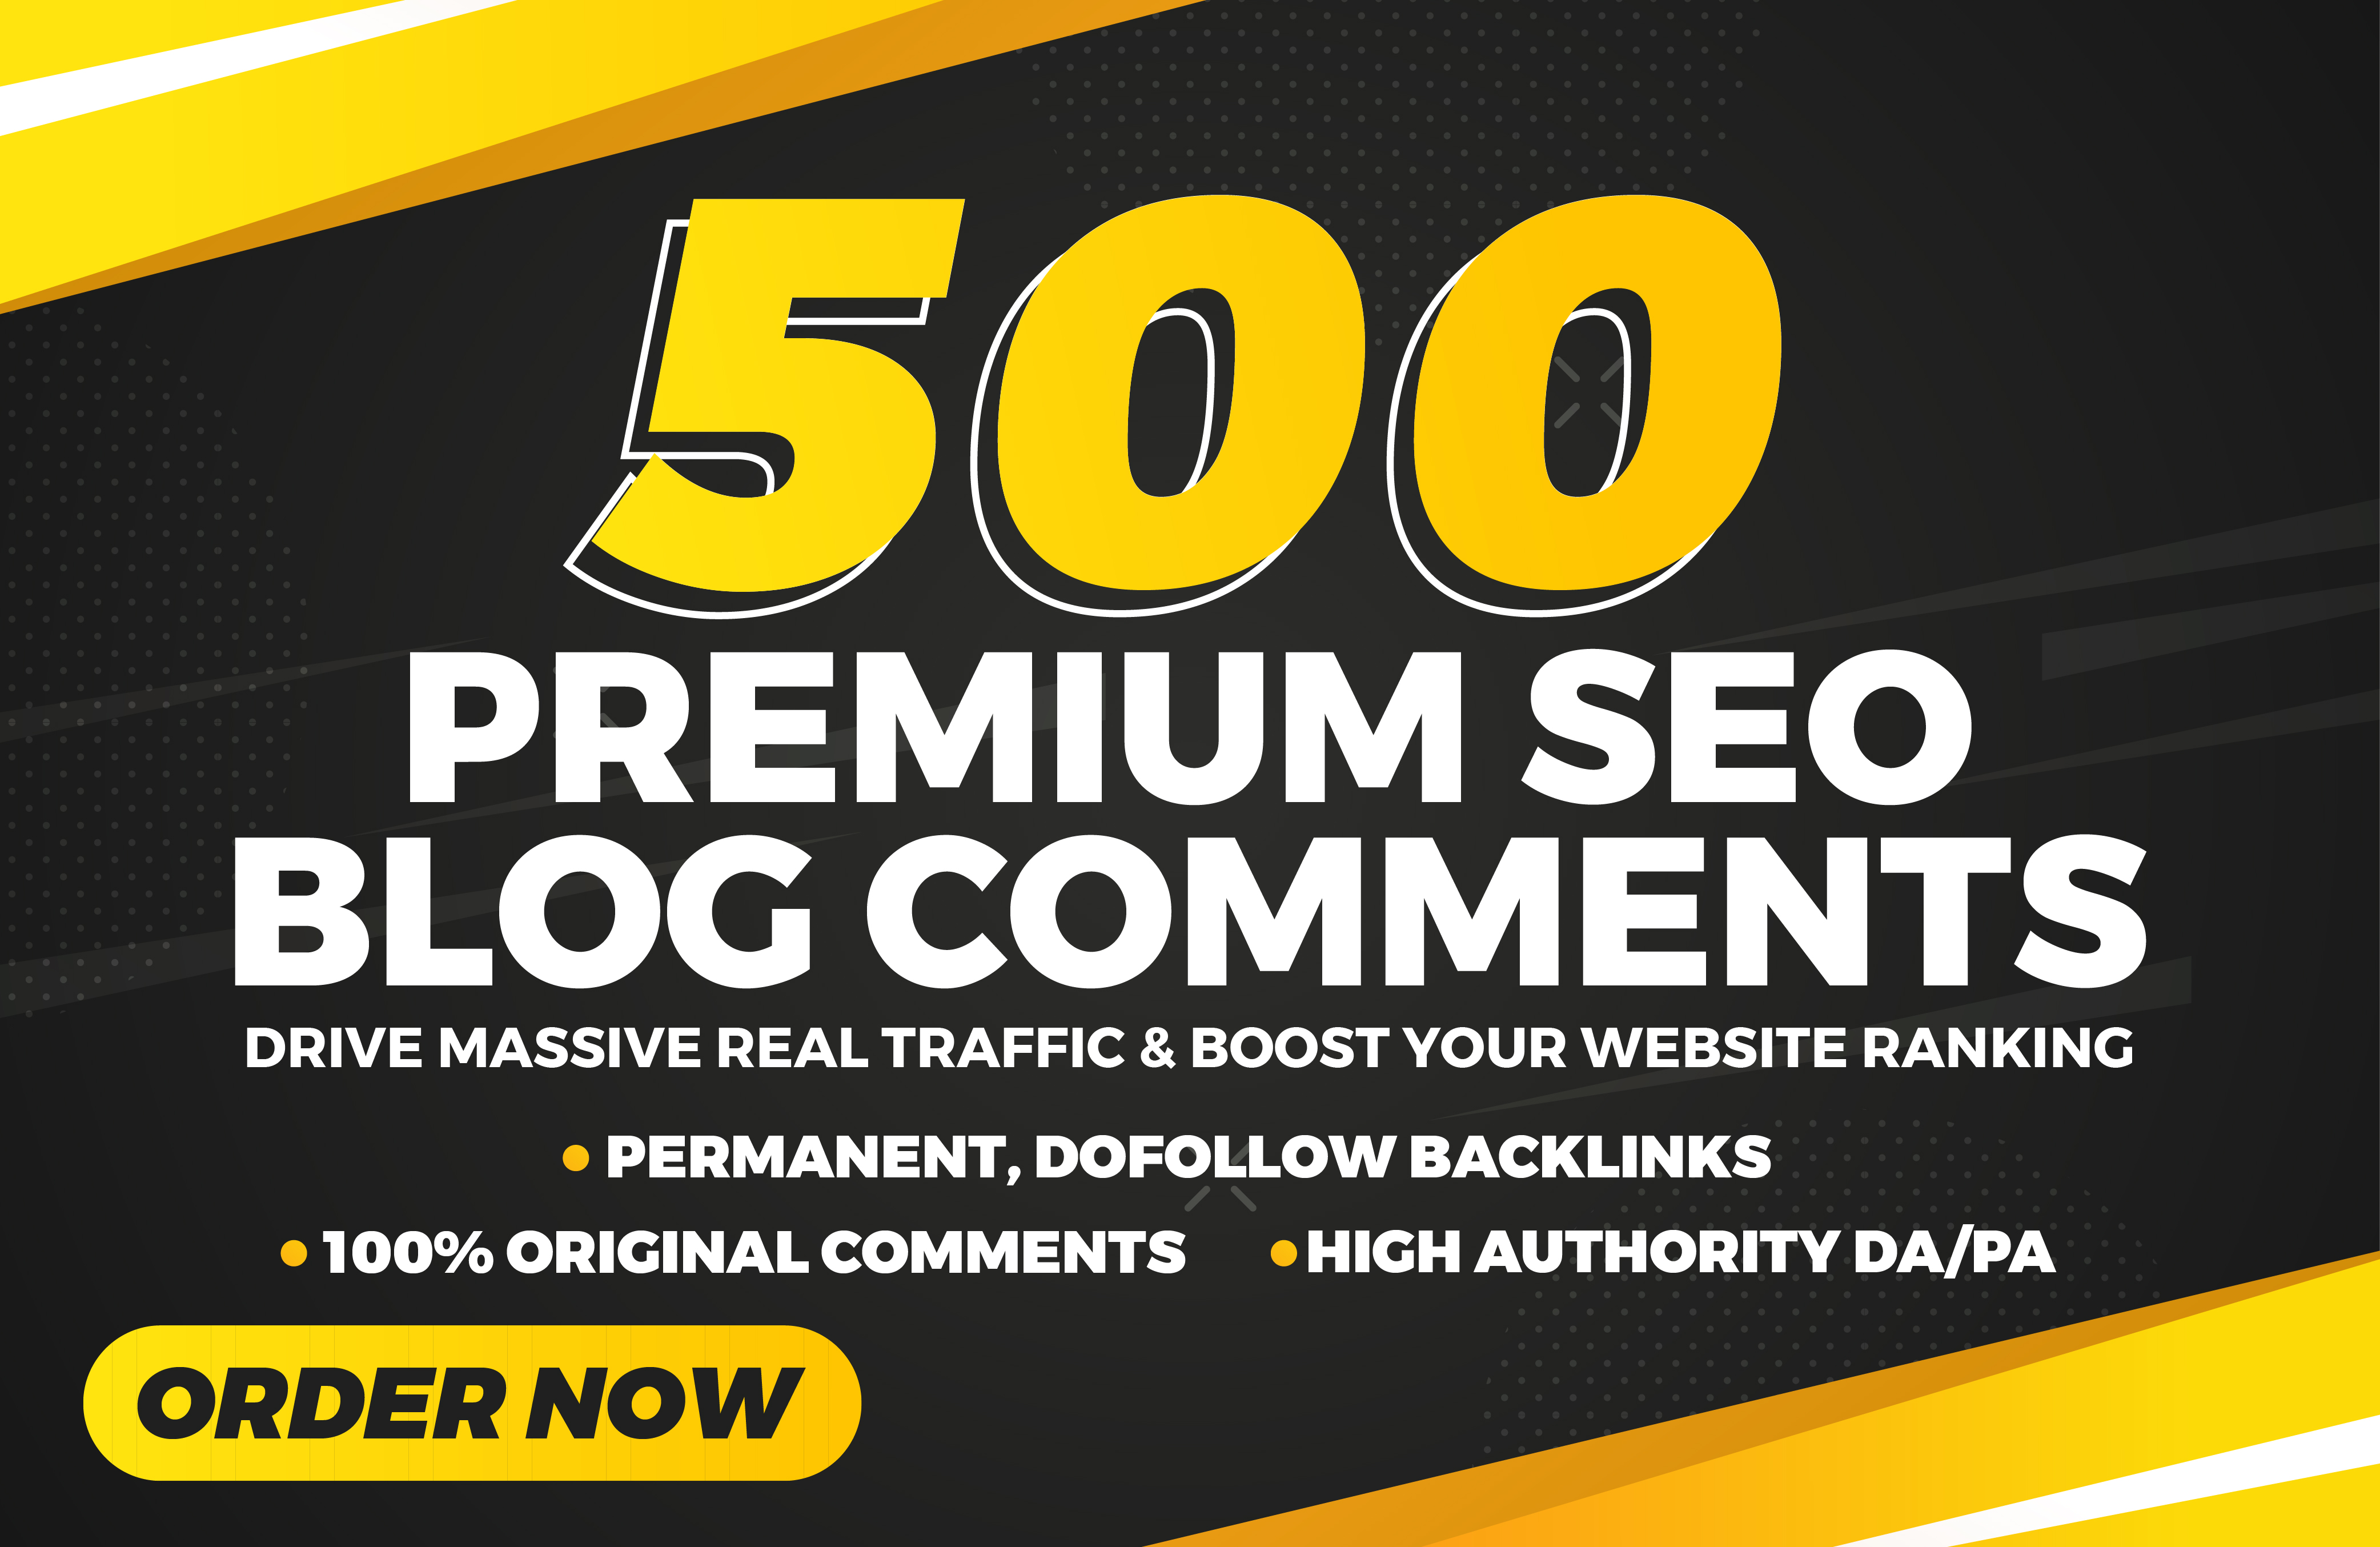 Will Provide 500 Premium SEO Blog Comments For Profitable Backlinks To Improve Ranking